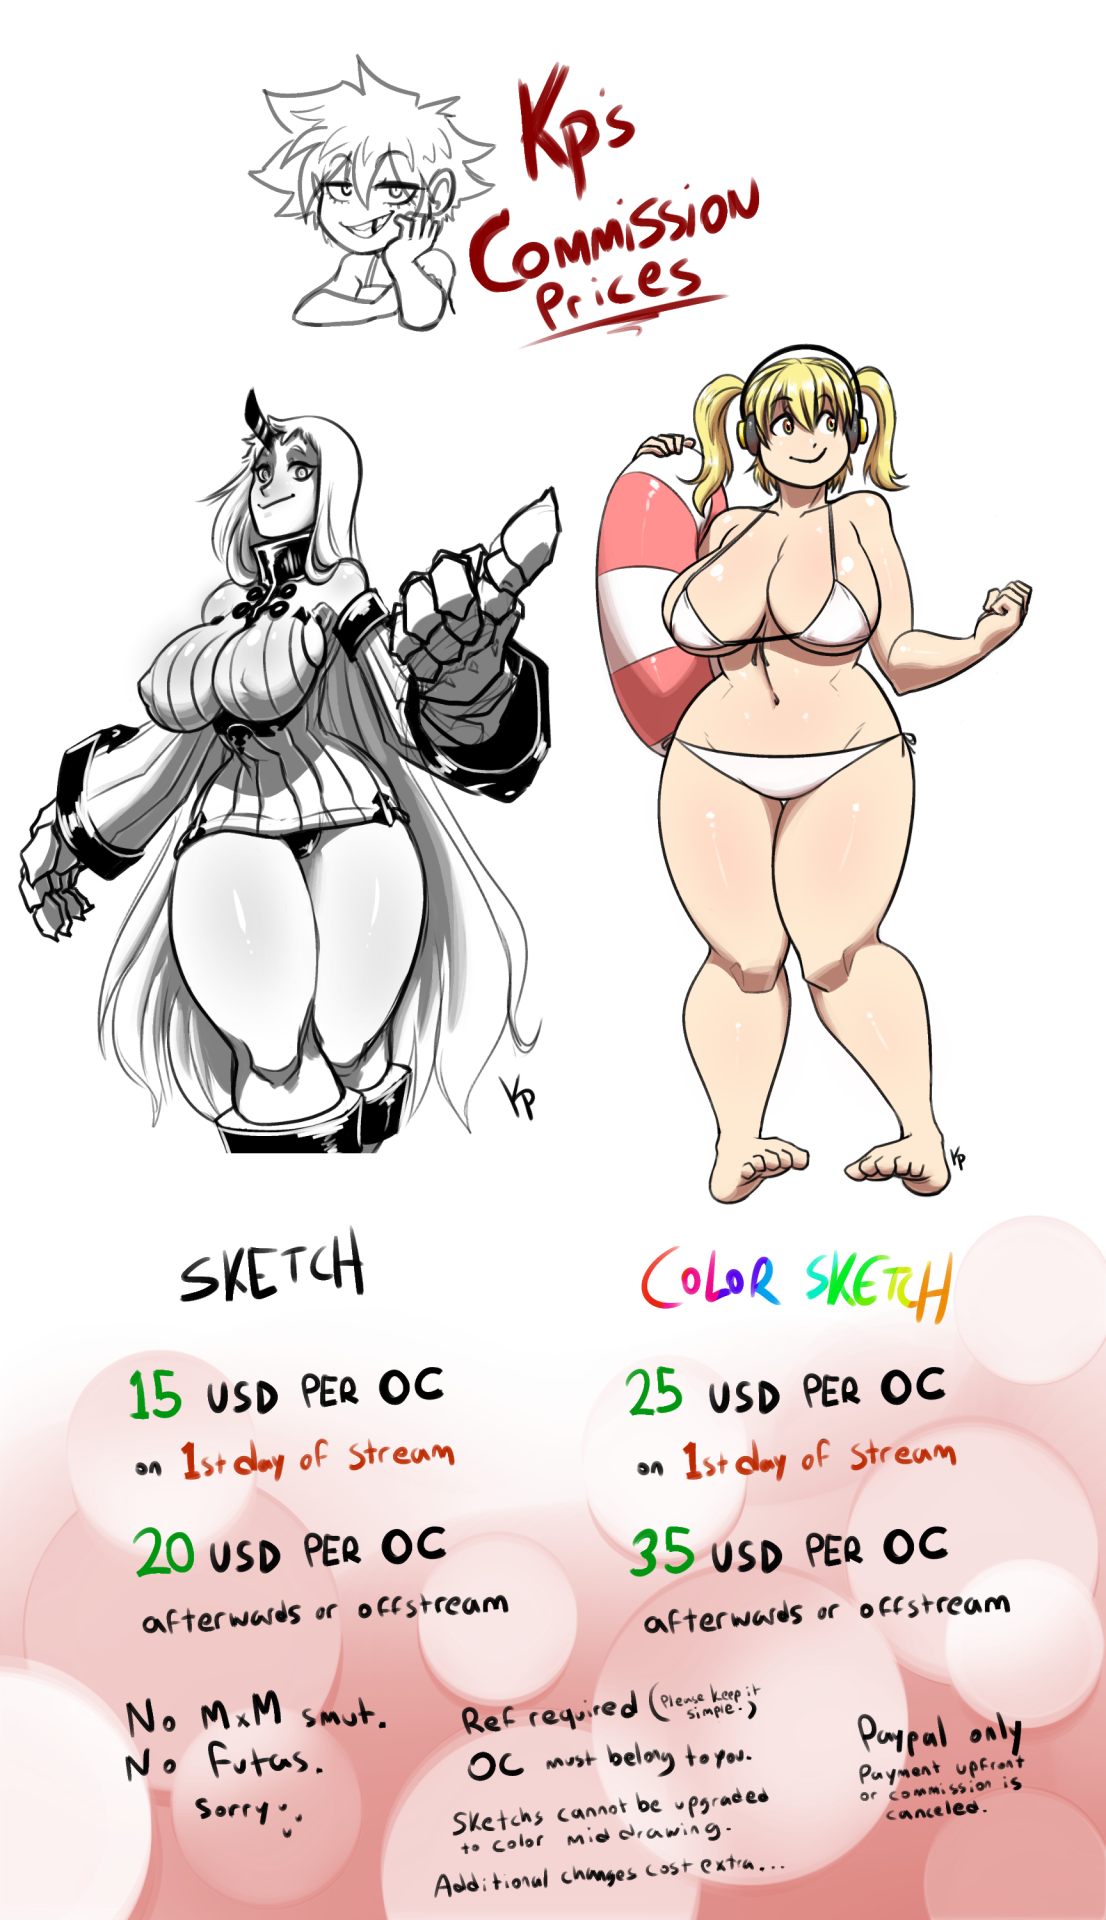 Commission Prices up to date!